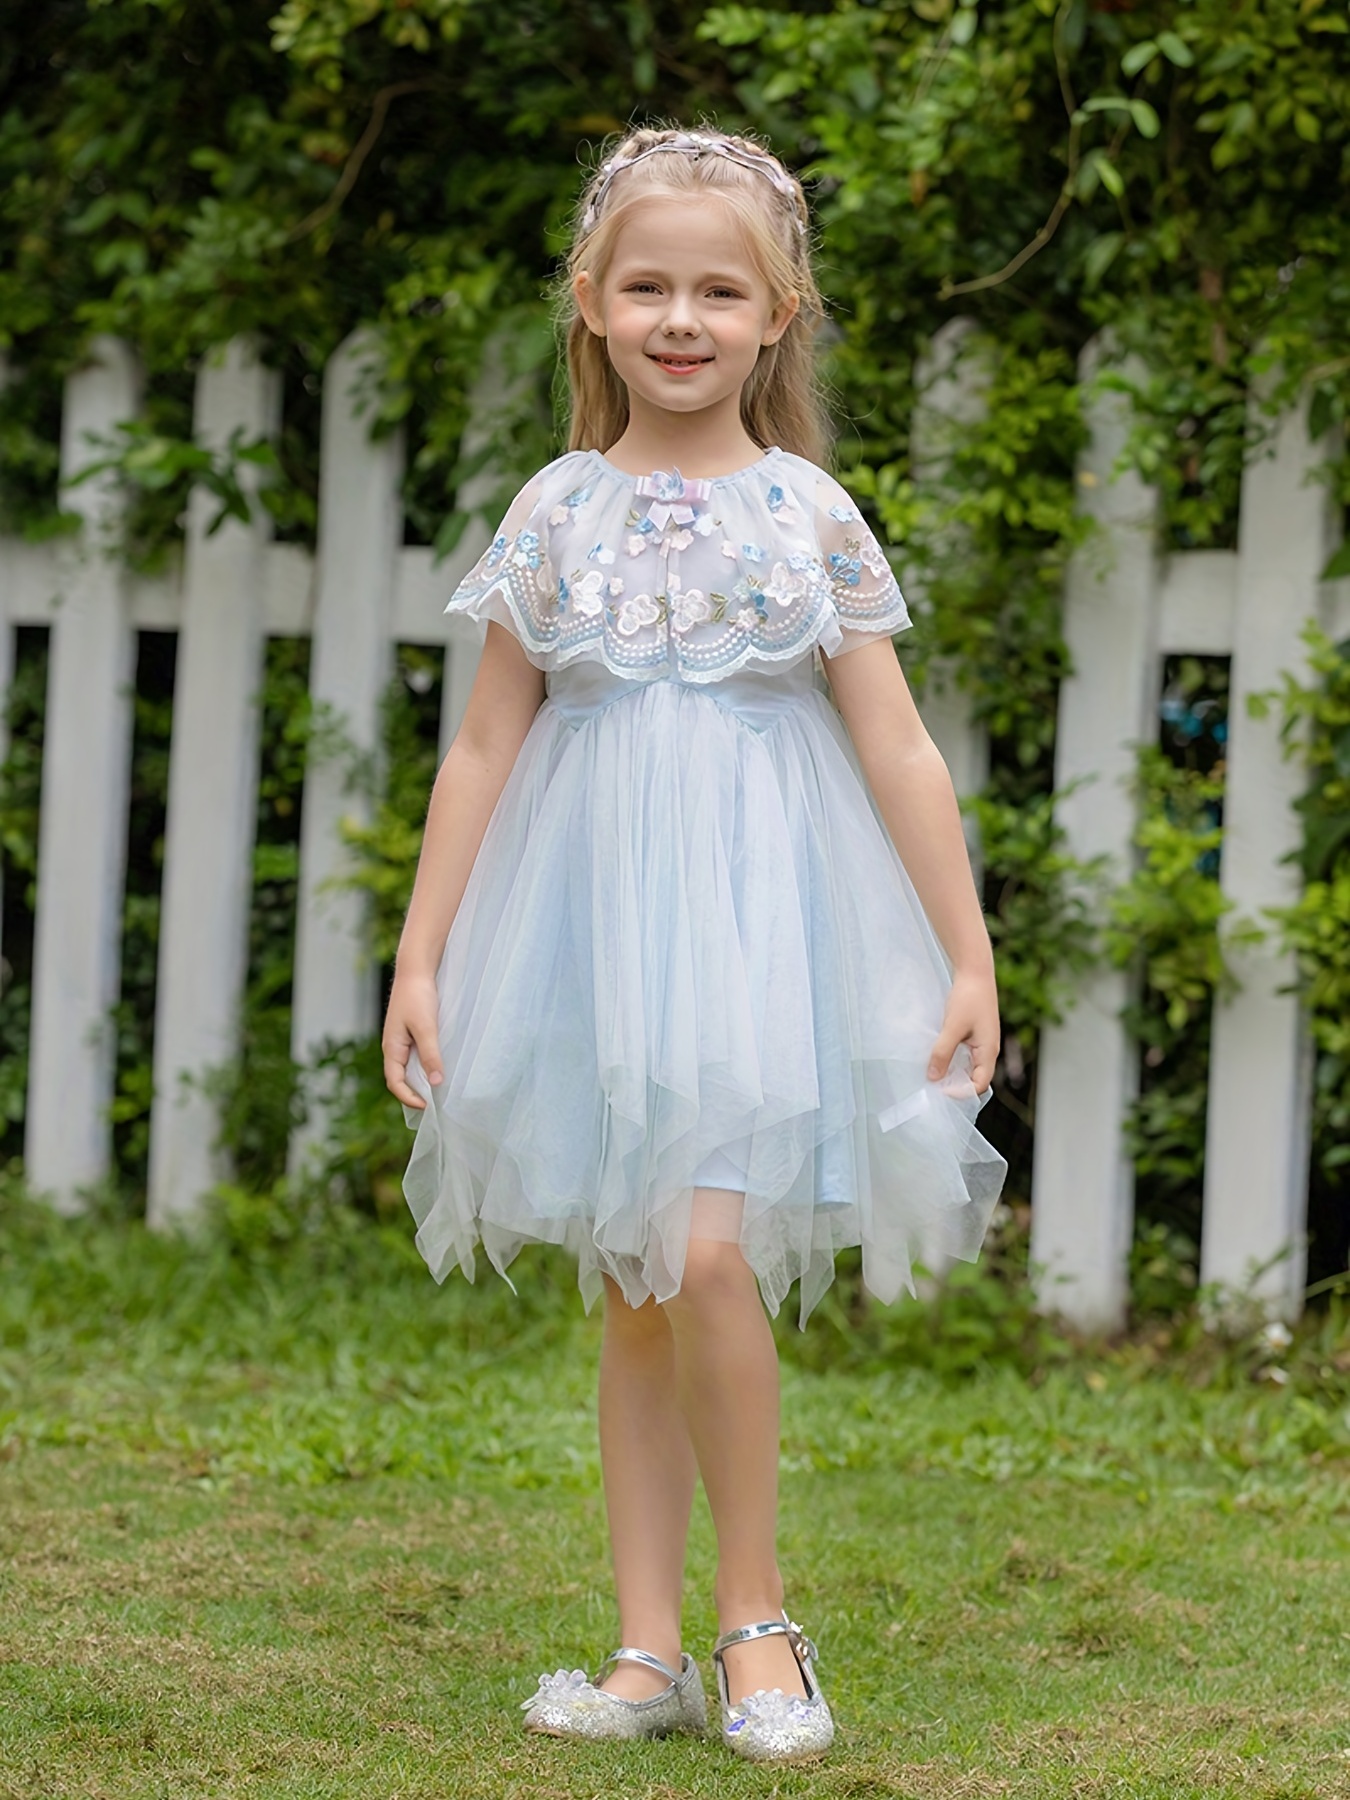 Baby Girl's Ruffle Trim Stitching Dress with Bow, Child's Casual Dress, Christmas Gifts,Temu